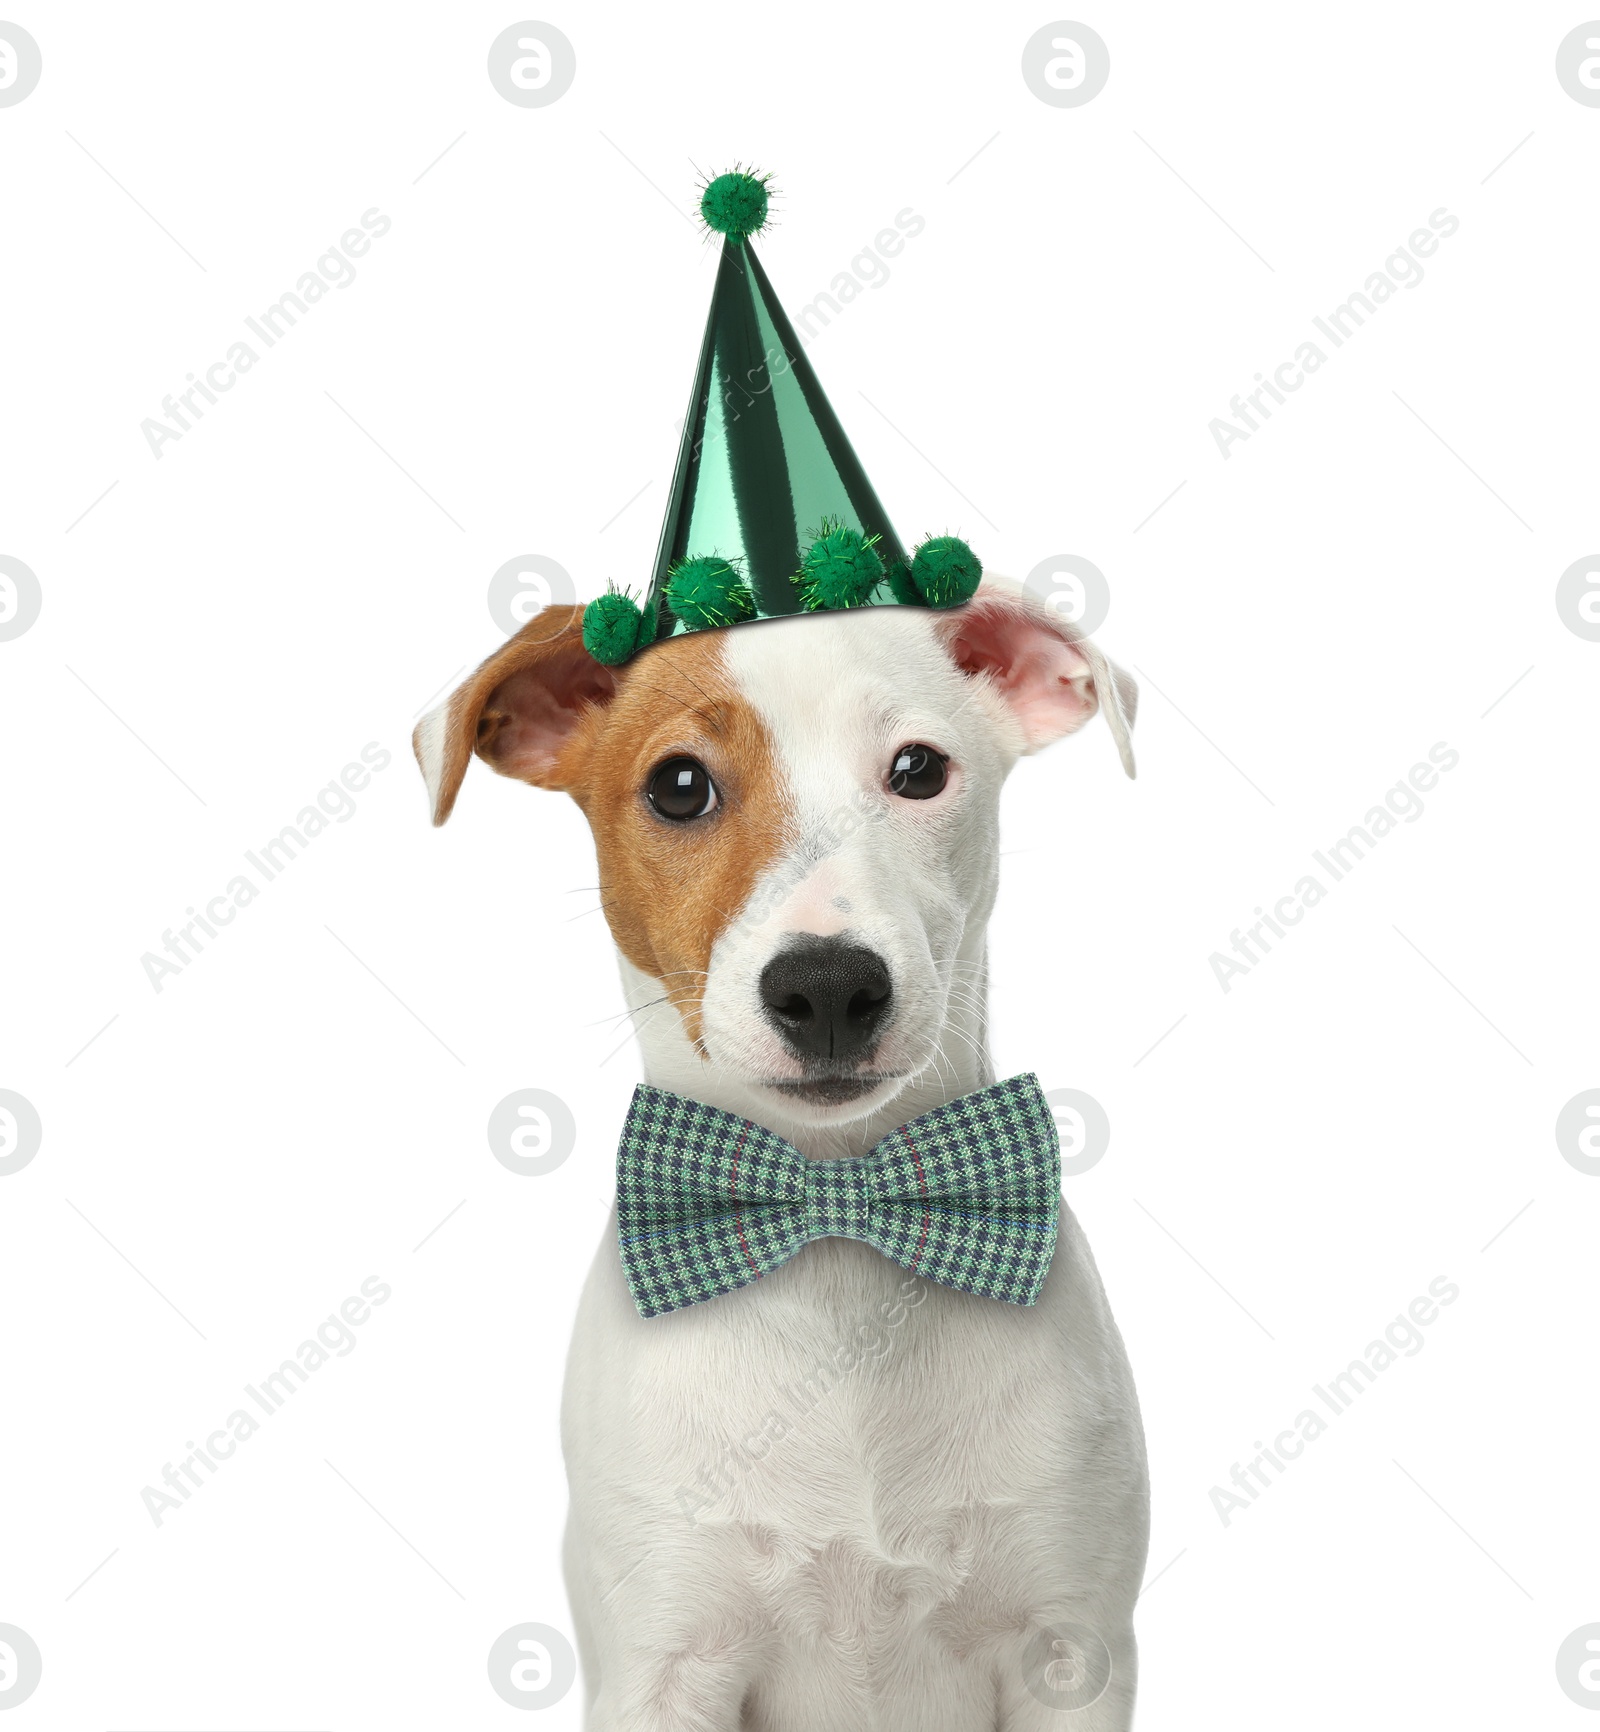 Image of Cute Jack Russell terrier dog with party hat and bow tie on white background